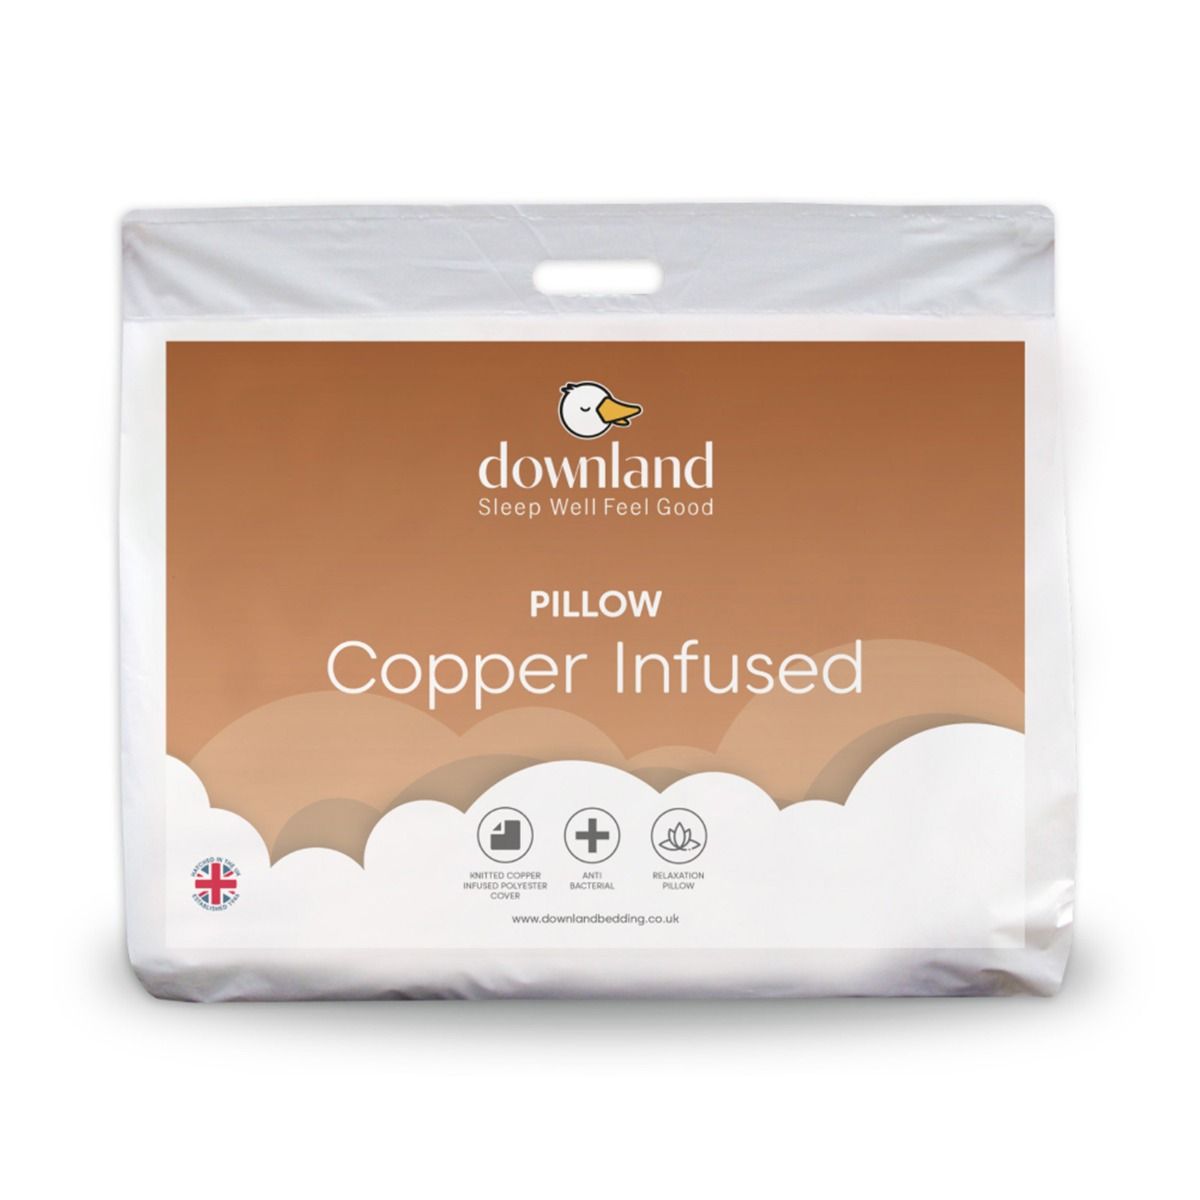 Downland Copper Infused Pillow - White